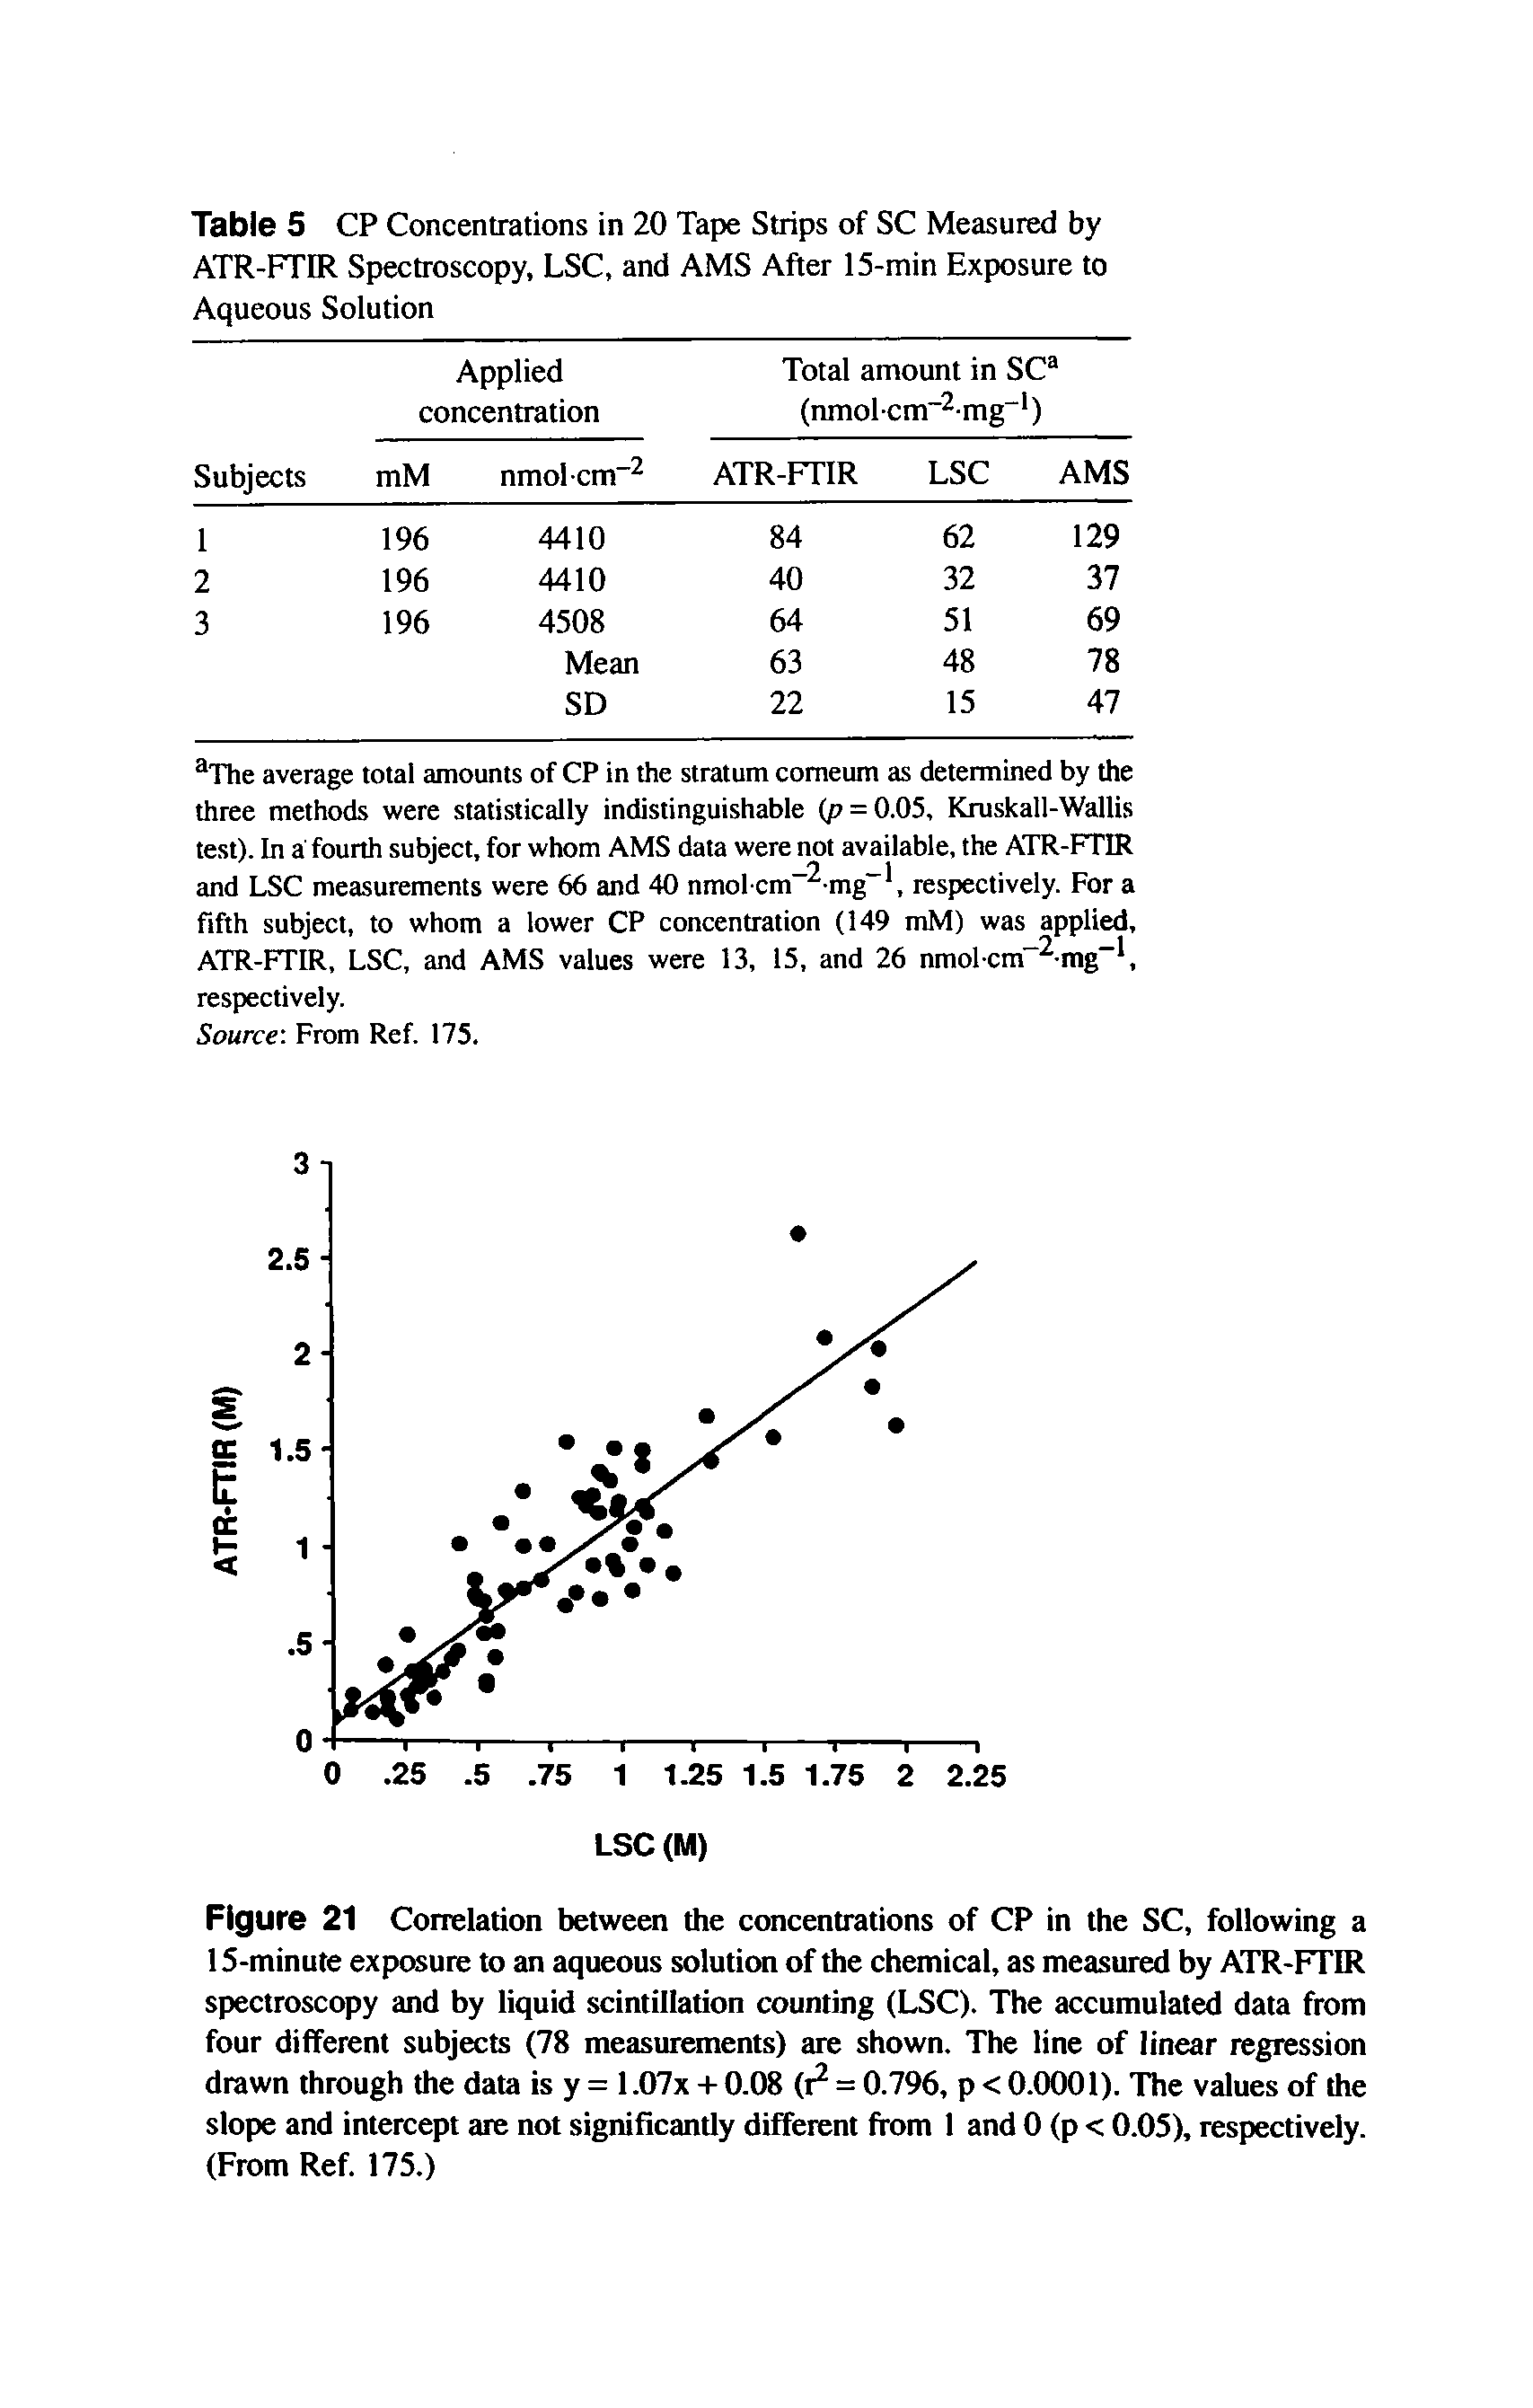 Figure 21 Correlation between the concentrations of CP in the SC, following a 15-minute exposure to an aqueous solution of the chemical, as measured by ATR-FTIR spectroscopy and by liquid scintillation counting (LSC). The accumulated data from four different subjects (78 measurements) are shown. The line of linear regression drawn through the data is y = 1,07x + 0.08 (r = 0.796, p < 0.0001). The values of the slope and intercept are not significantly different from 1 and 0 (p < 0.05), respectively. (From Ref. 175.)...